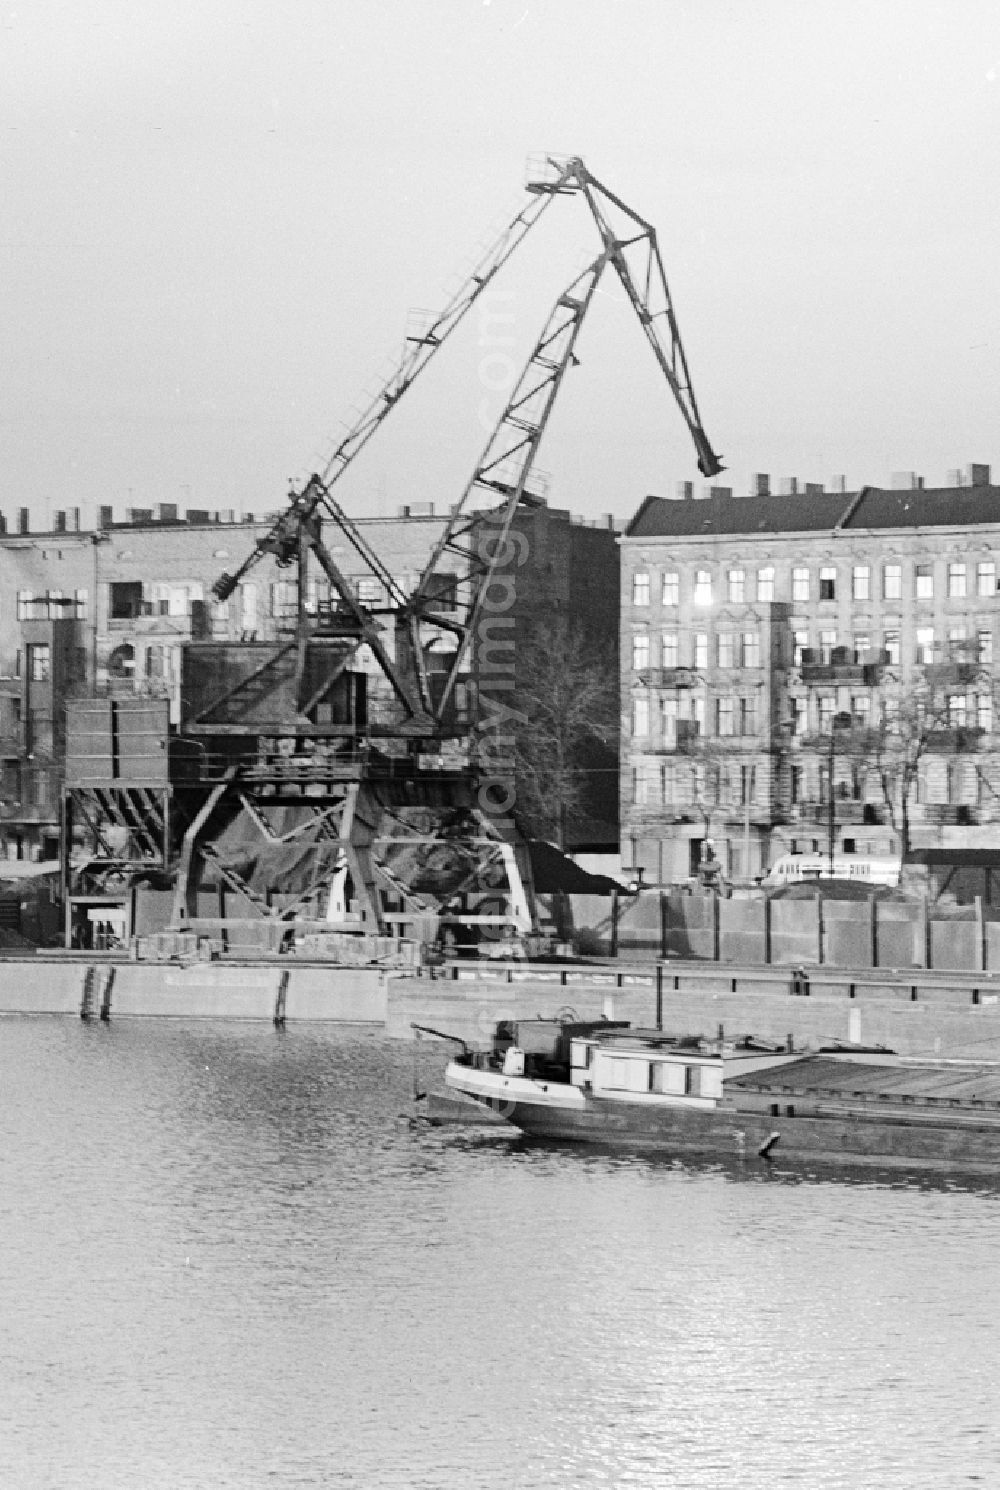 Berlin: A heavy-duty crane at the riverside in the east port - Port Industry in Berlin. In the background houses at Stralauer Allee. In the foreground a transport barge